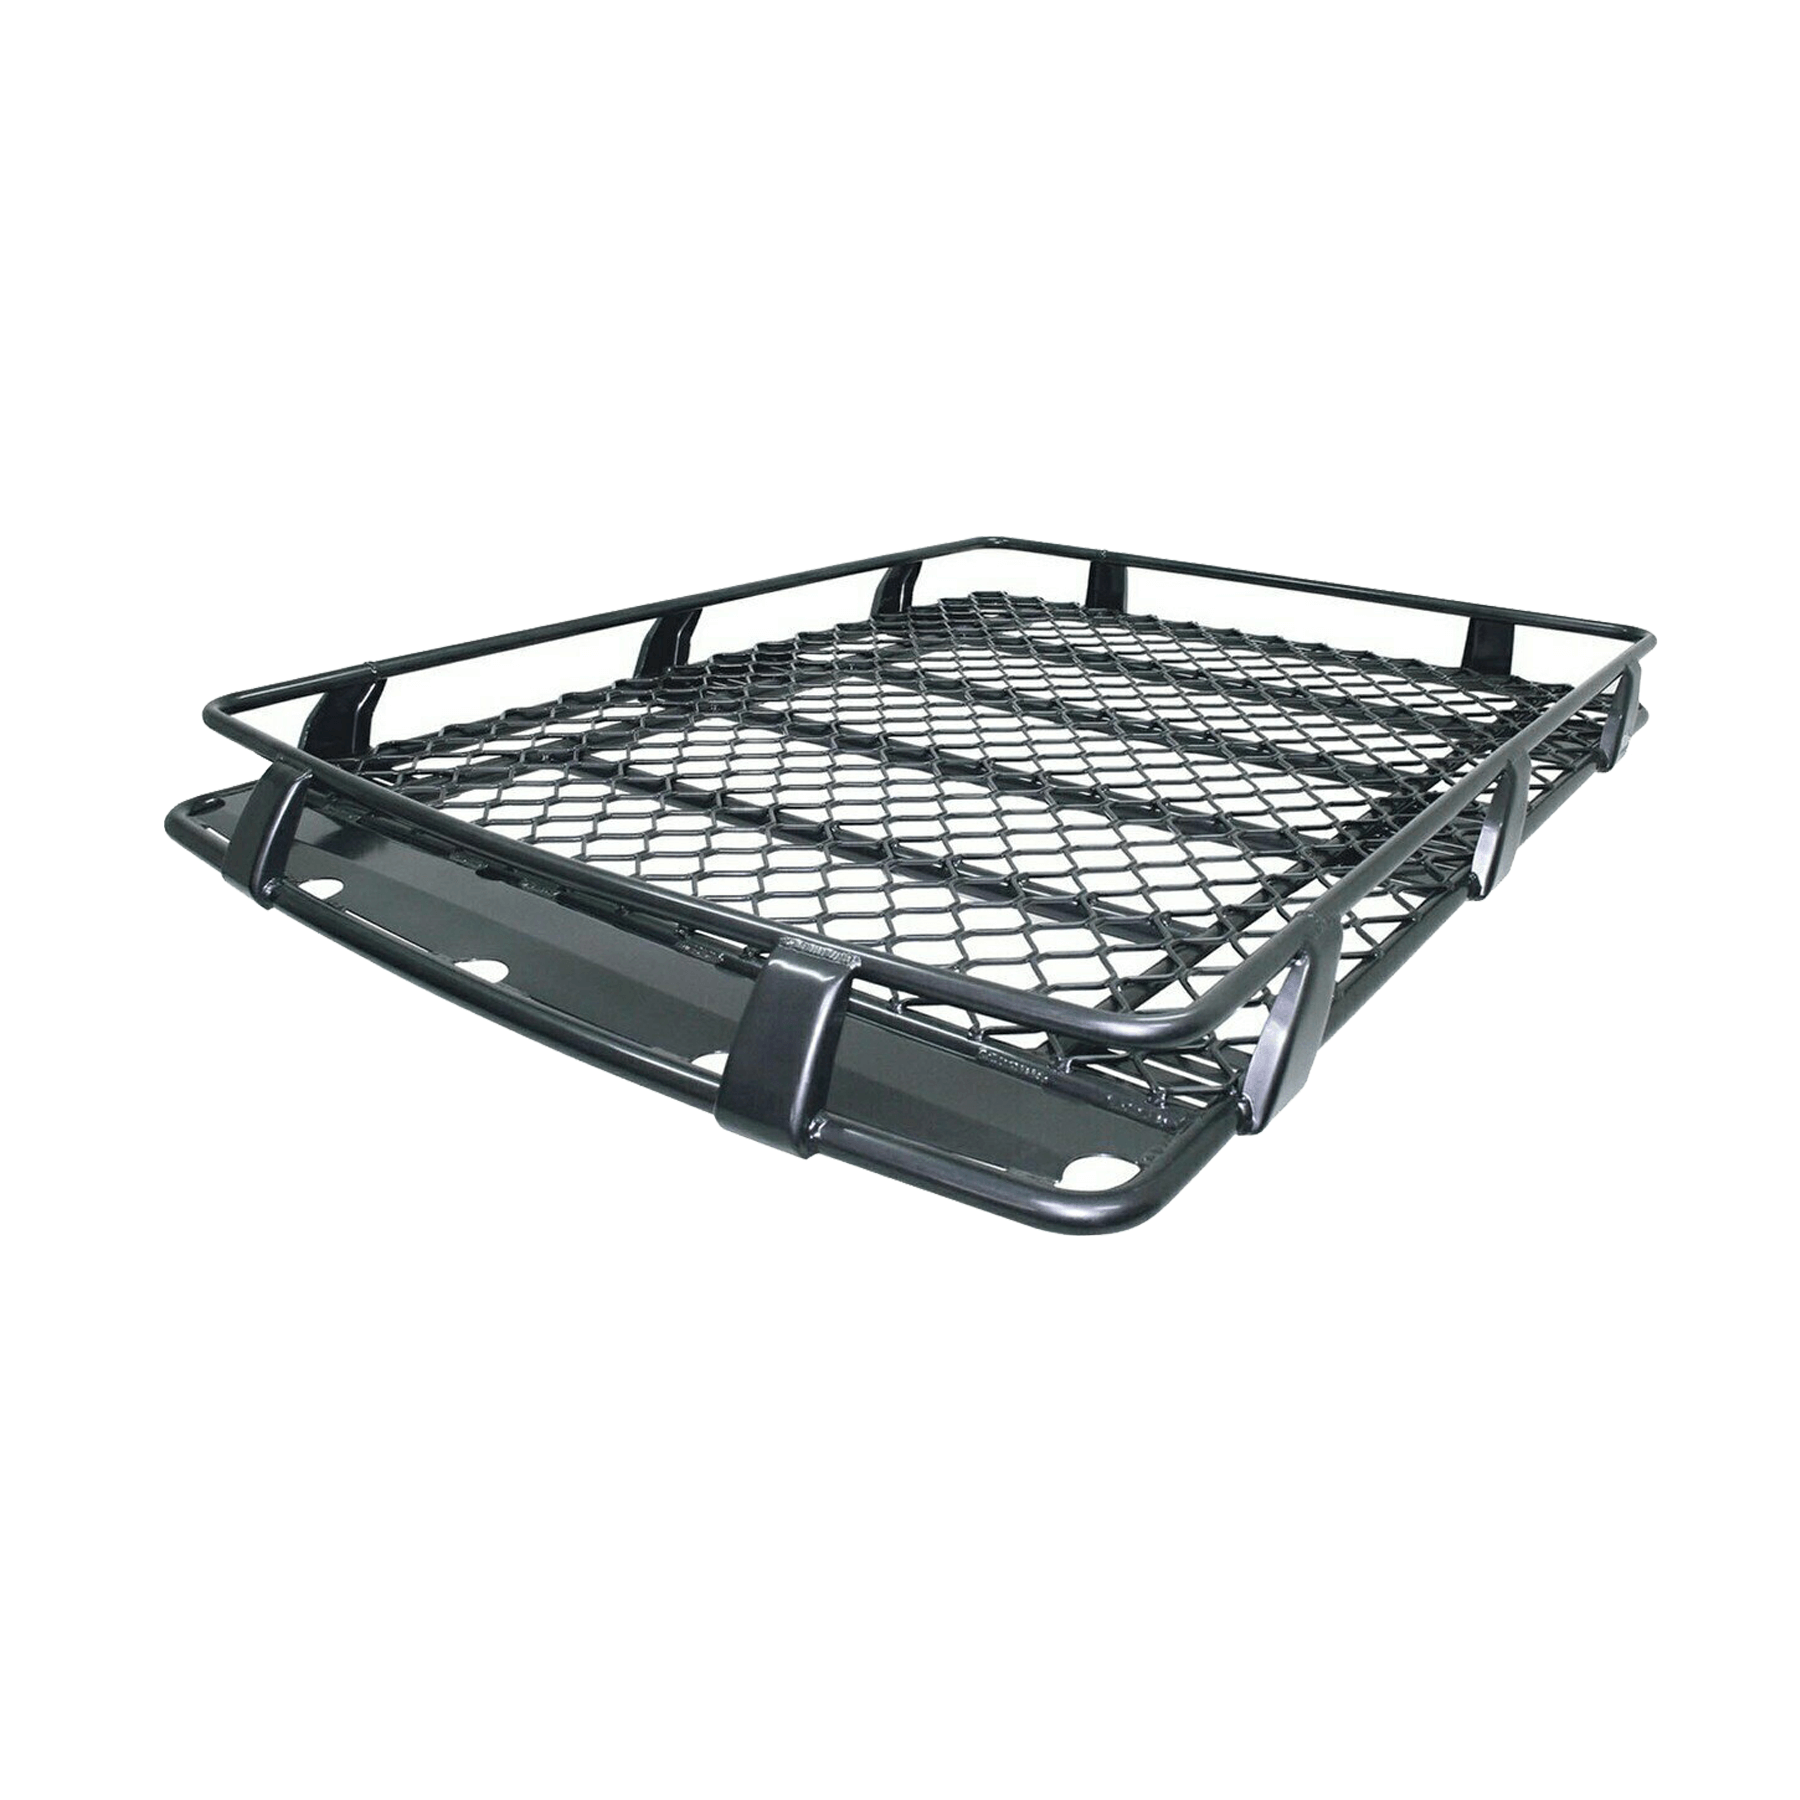 LANDCRUISER 80 SERIES 1990 TO 1998 BASKET ALLOY ROOF RACK – 1.4M X 1.25M (OPEN END)